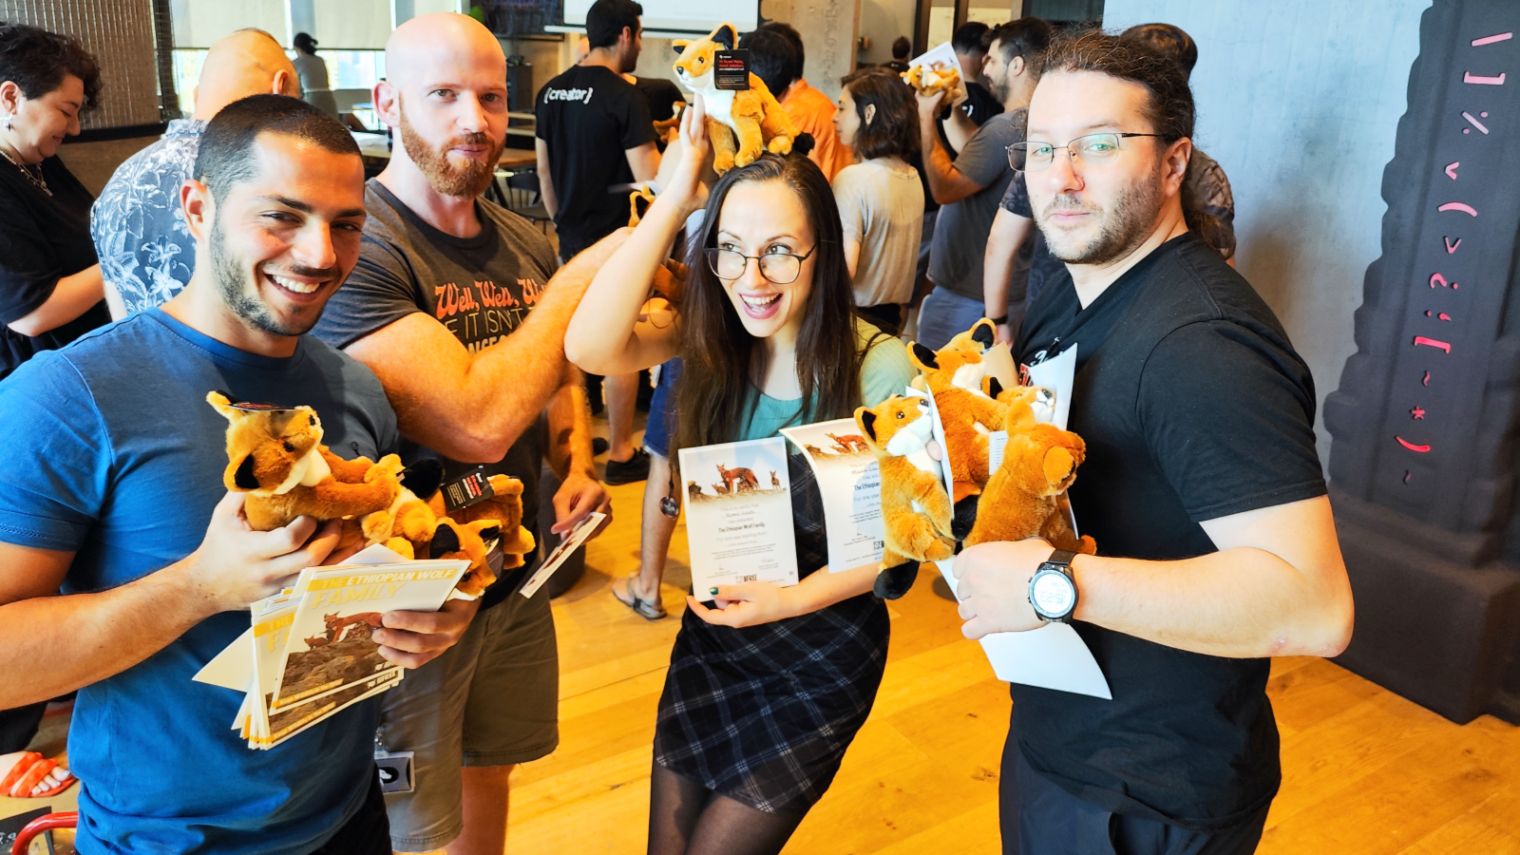 Overwolf employees were overjoyed with their wolf adoption certificates and plush wolves. Photo courtesy of Overwolf